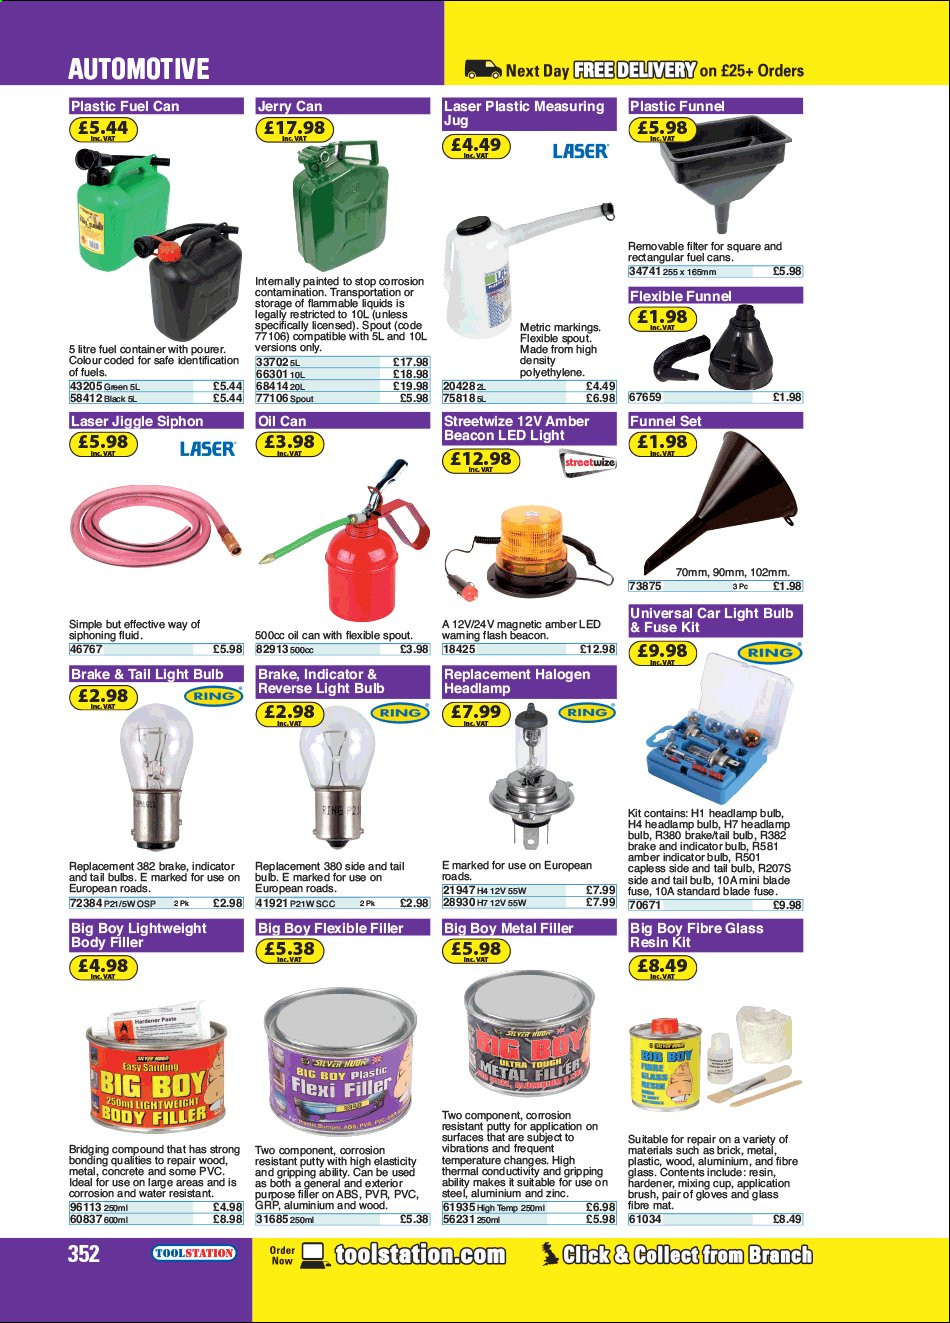 thumbnail - Toolstation offer  - Sales products - LED light, brick, gloves, brush, fuel can. Page 352.